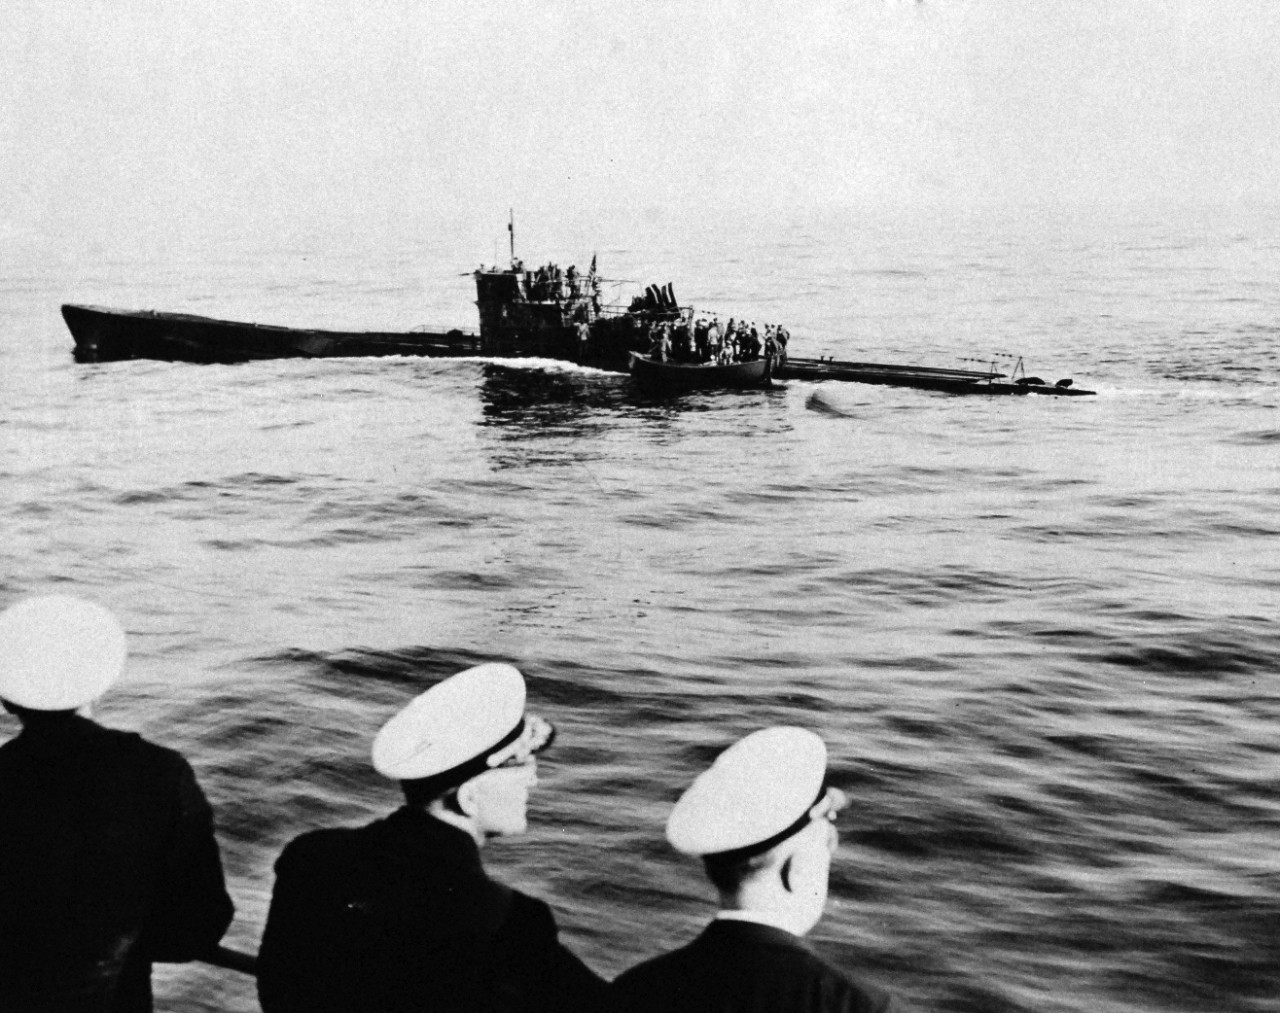 <p>80-G-700486: Surrender of German U-Boats, 1945. U.S. Marines search members of German submarine, U-858, 50 miles off Cape May, New Jersey, May 1945, as the submarine is turned over to representatives of Rear Admiral Milo F. Braemel, Commandant of the Fourth Naval District, by units of the Atlantic Fleet to whom she surrendered. Photograph released May 10, 1945.</p>
